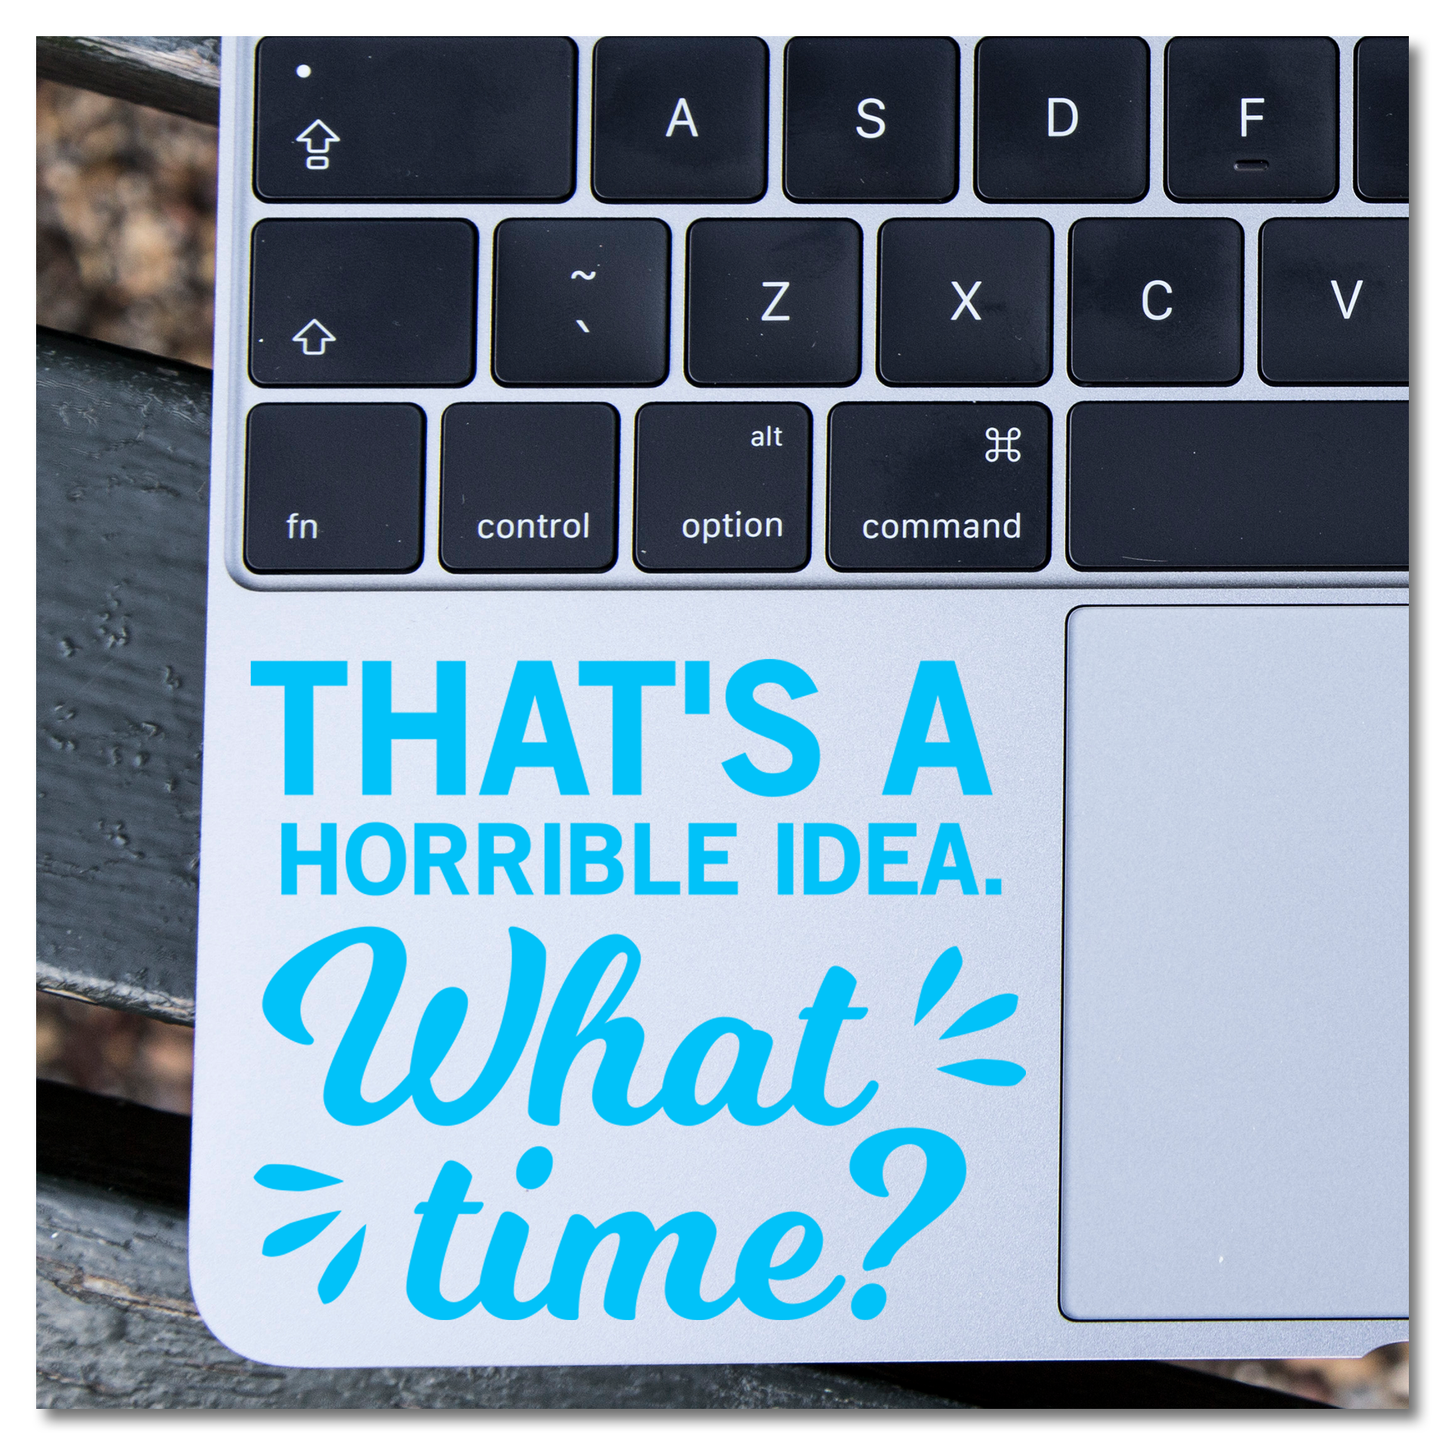 That's A Horrible Idea What Time Vinyl Decal Sticker